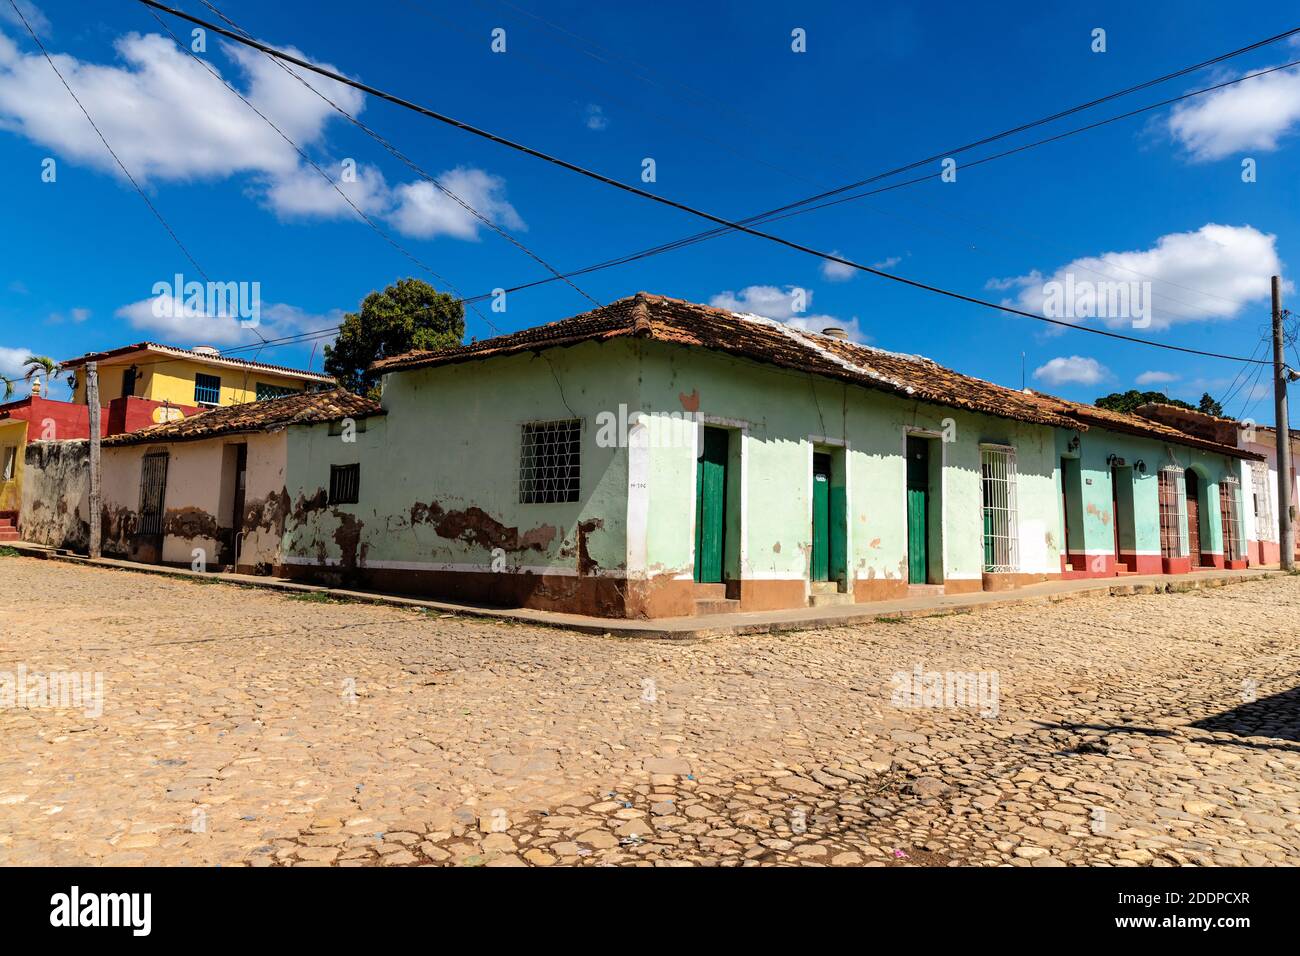 Trinidad is one of the most tourist attractive city in Cuba. There are very nice neighborhoods in the city. Stock Photo